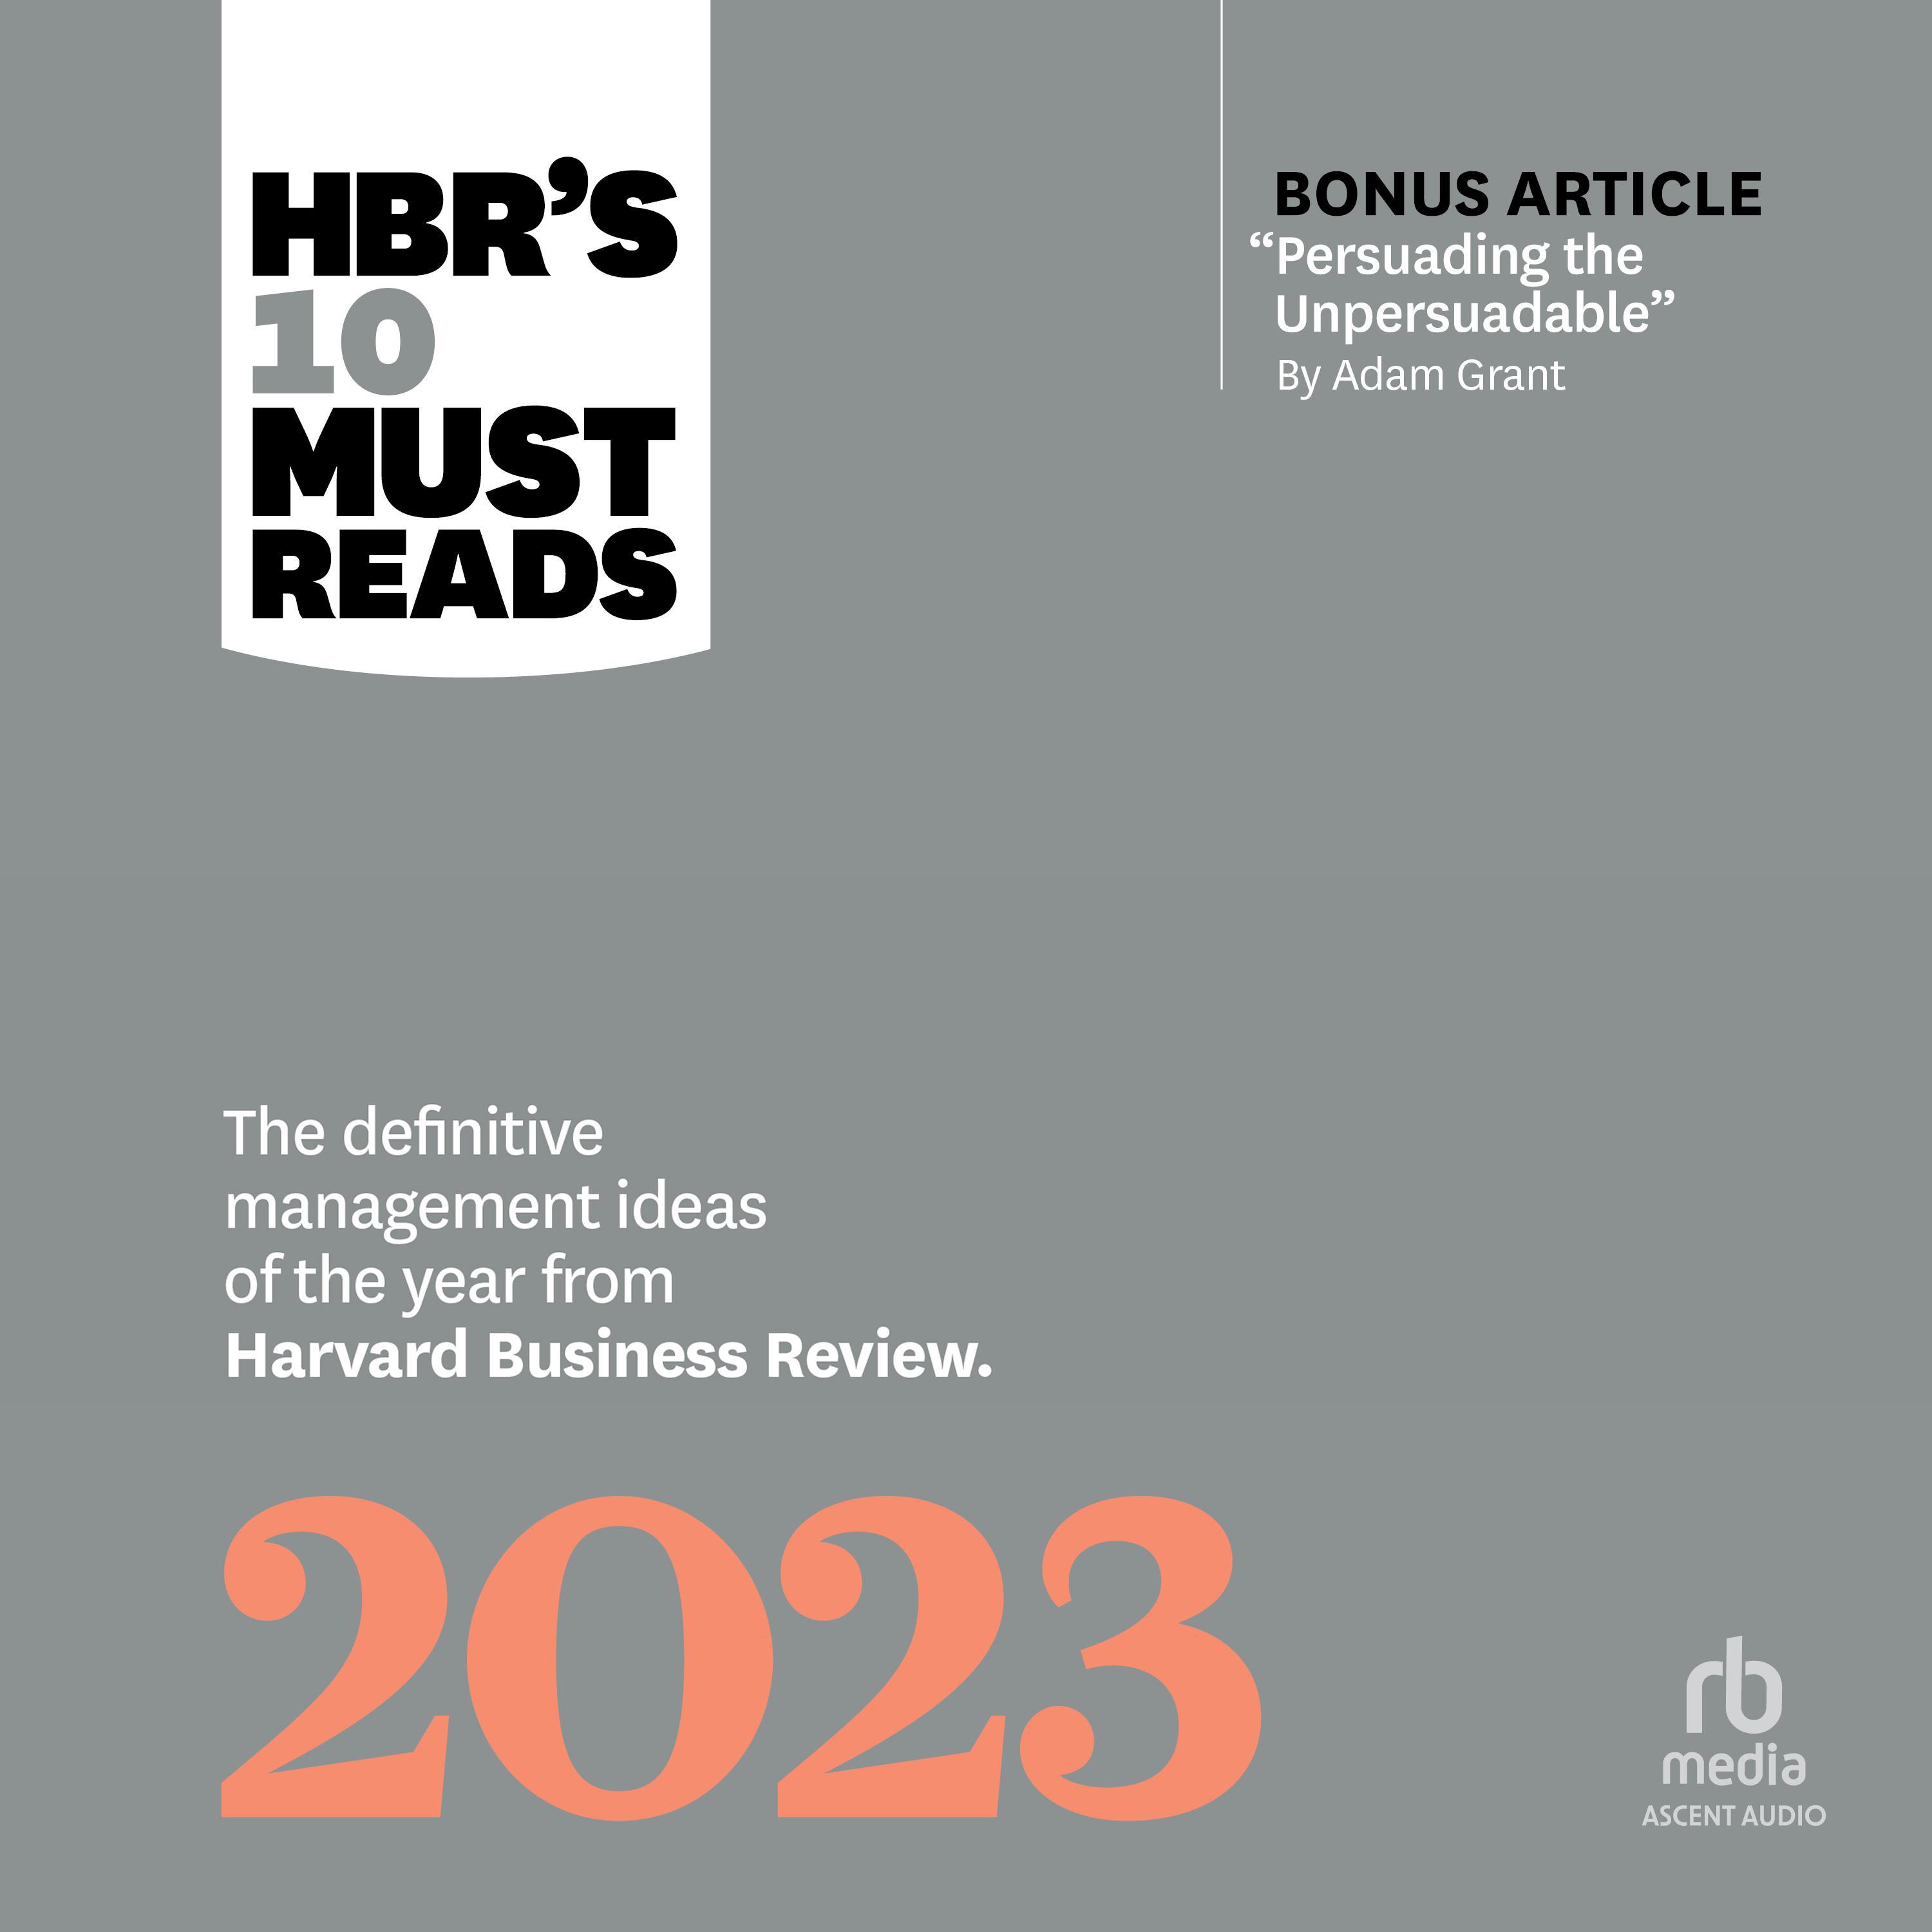 HBR's 10 Must Reads 2023 Audiobook by Harvard Business Review